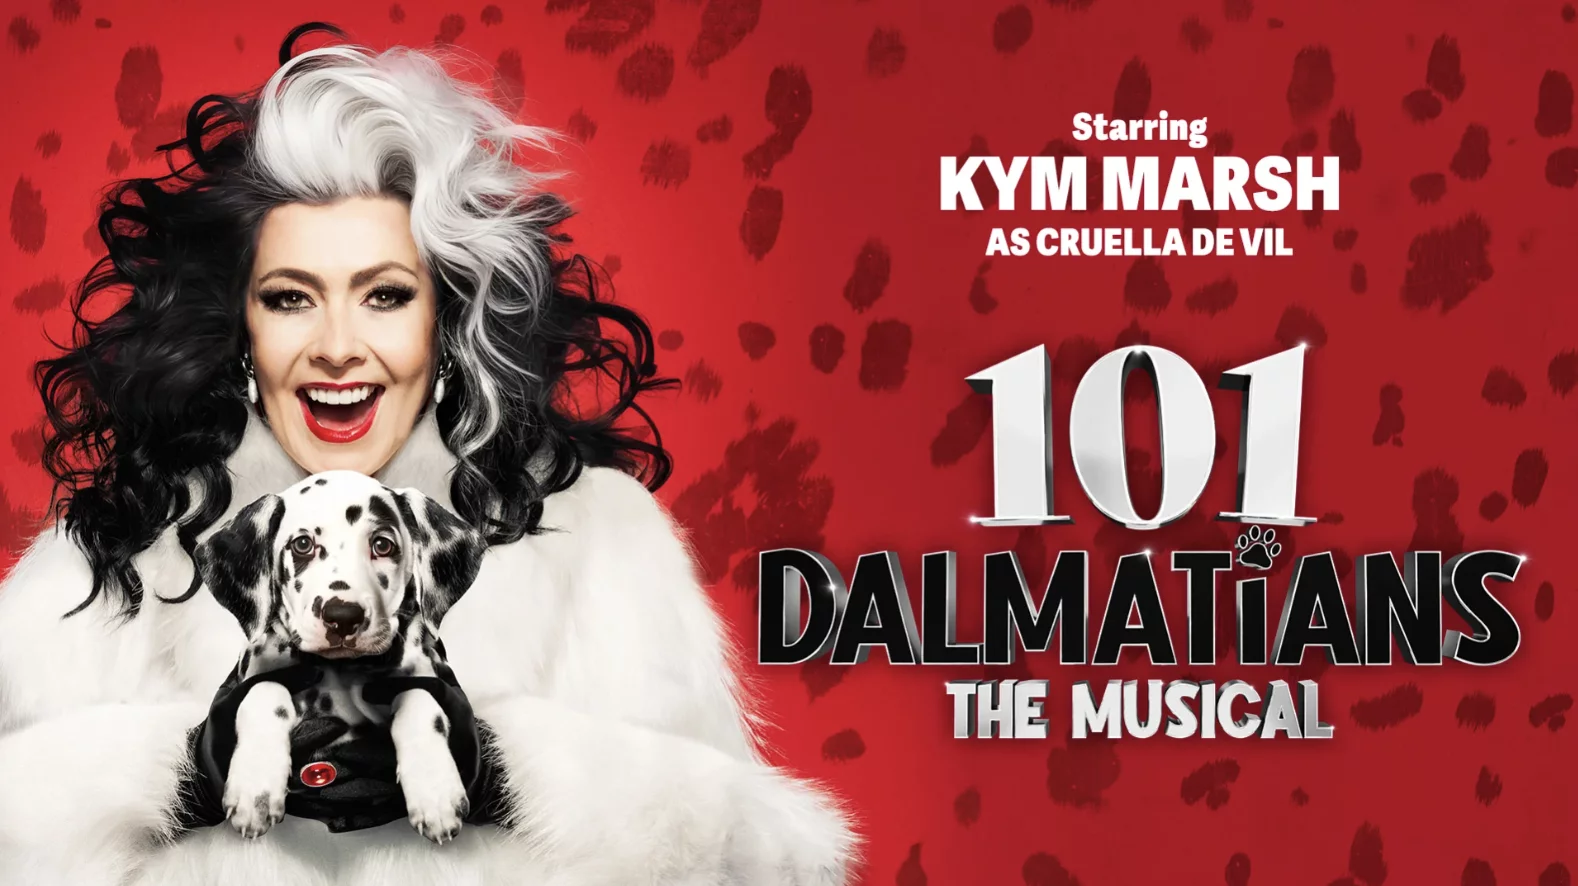 Kym Marsh and Faye Tozer to share the role of Cruella De Vil in new 101 Dalmatians musical adaptation.